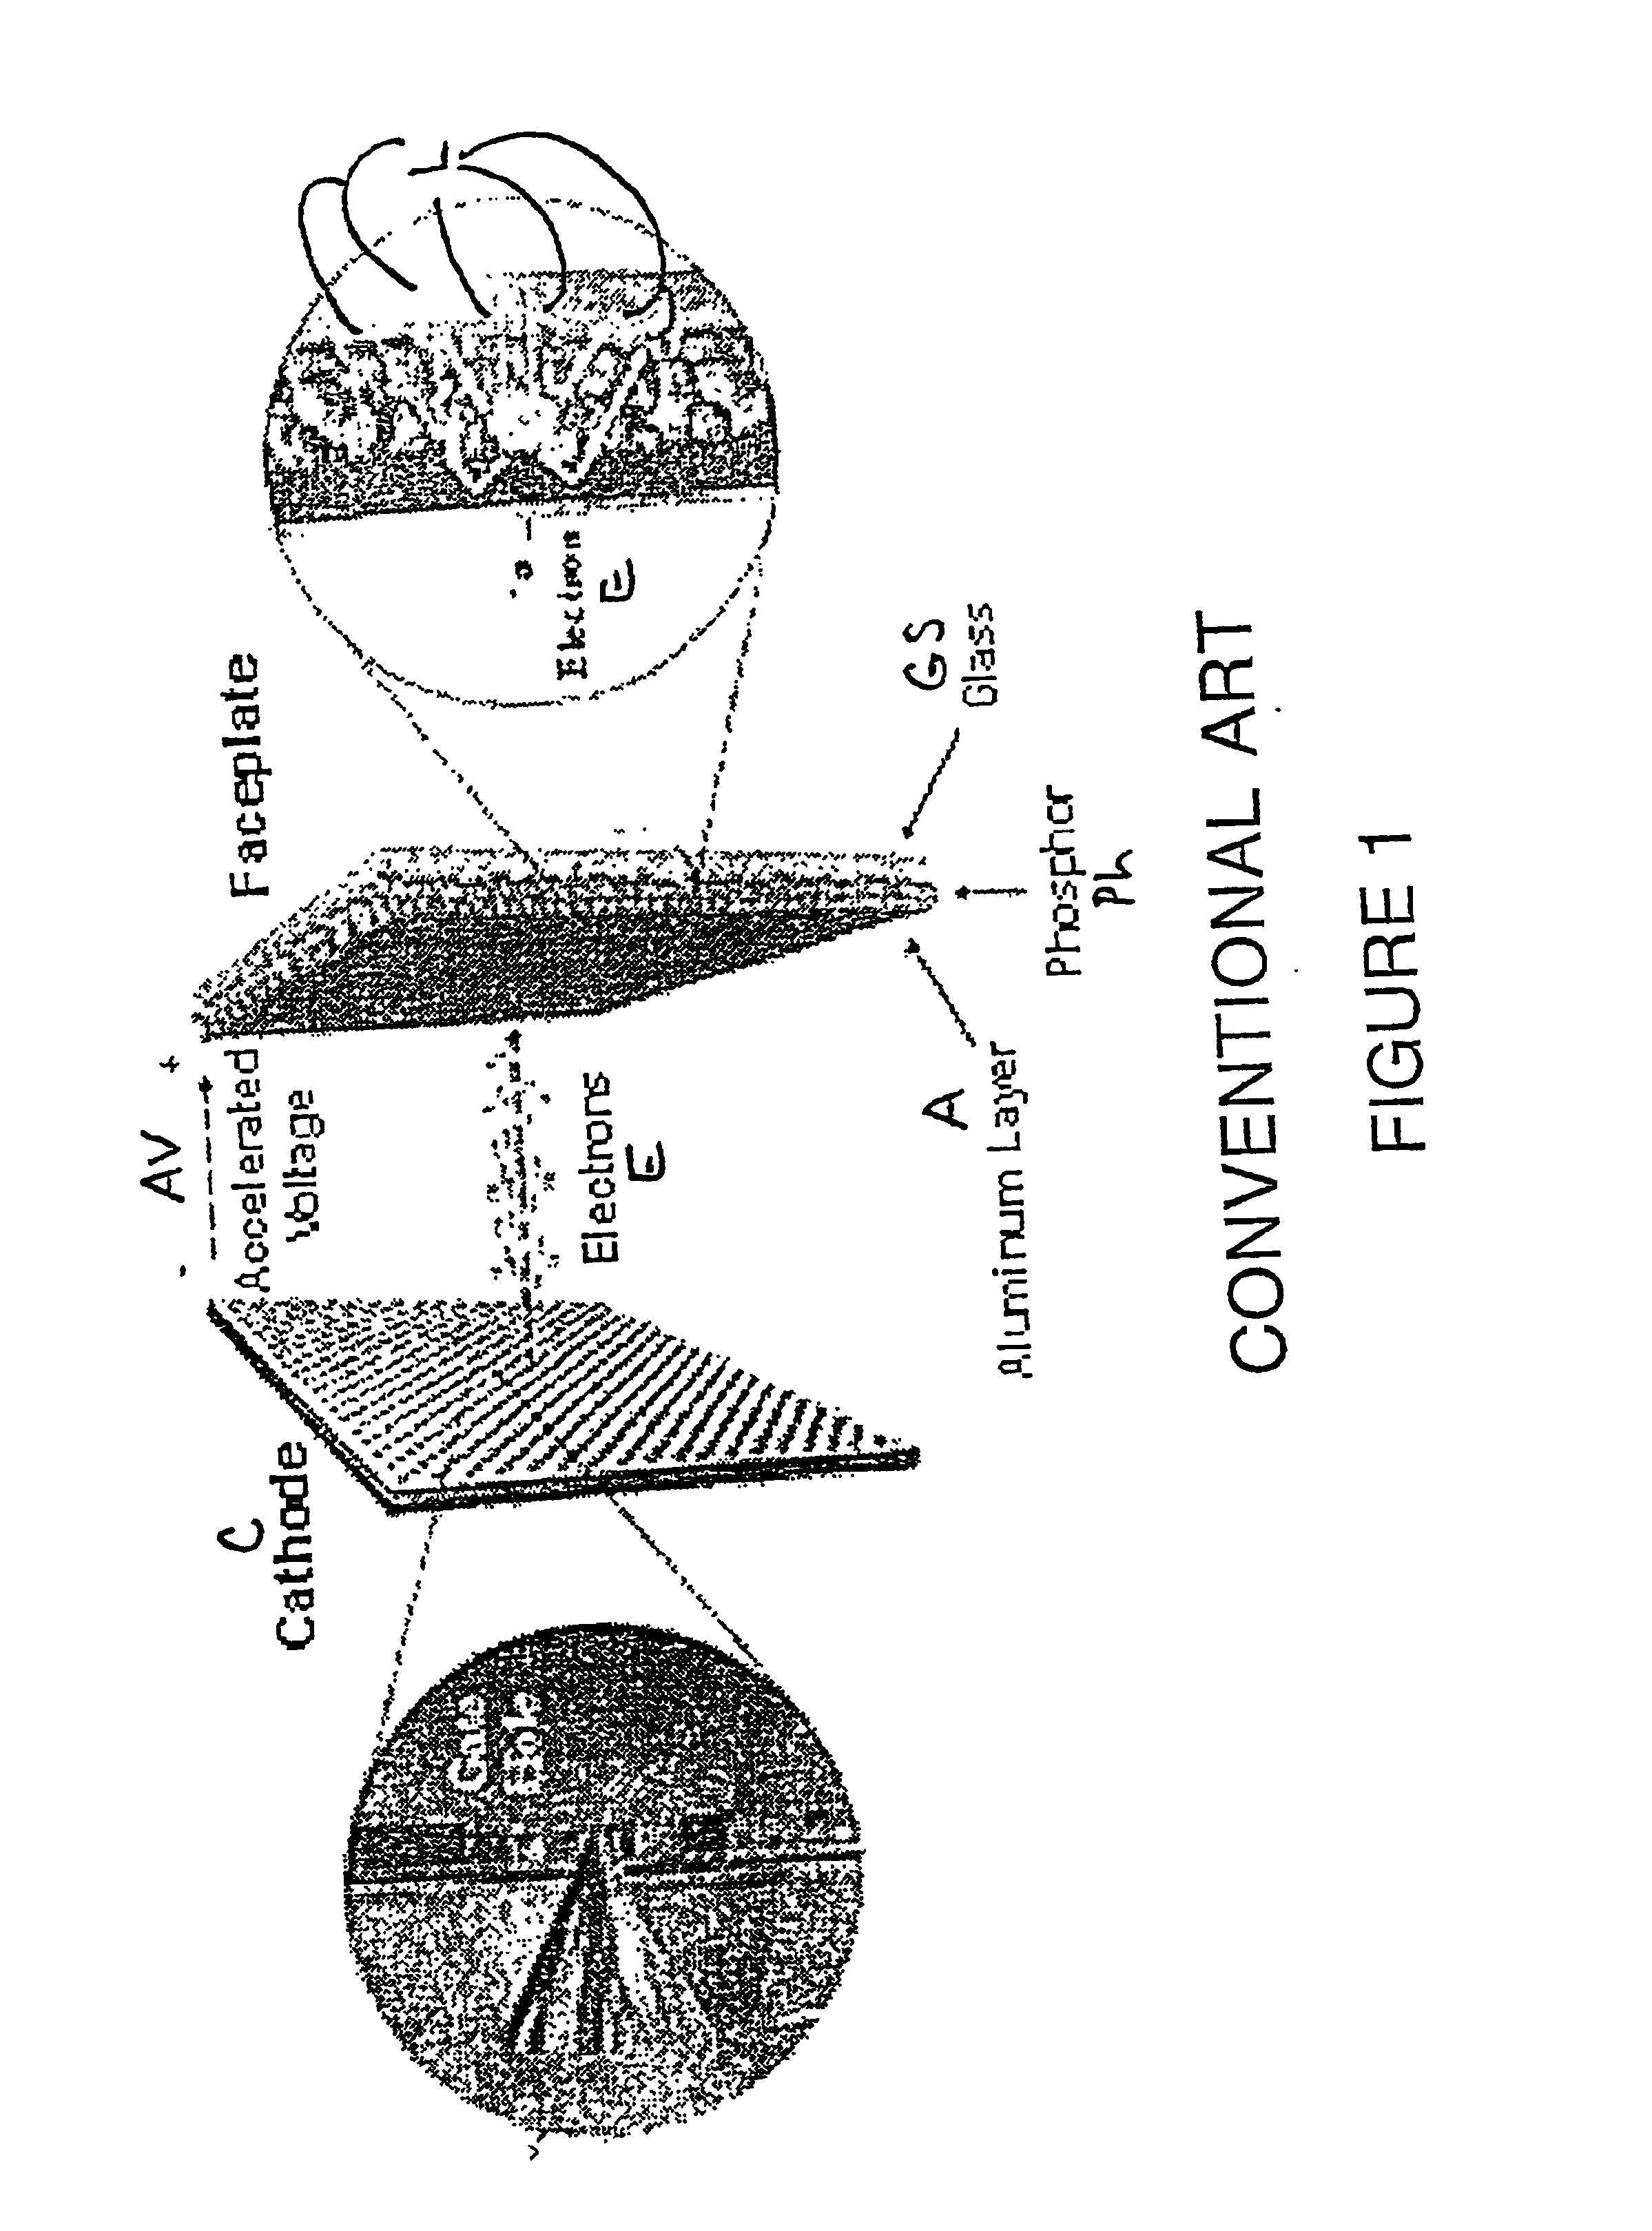 Method for implementing an efficient and economical cathode process